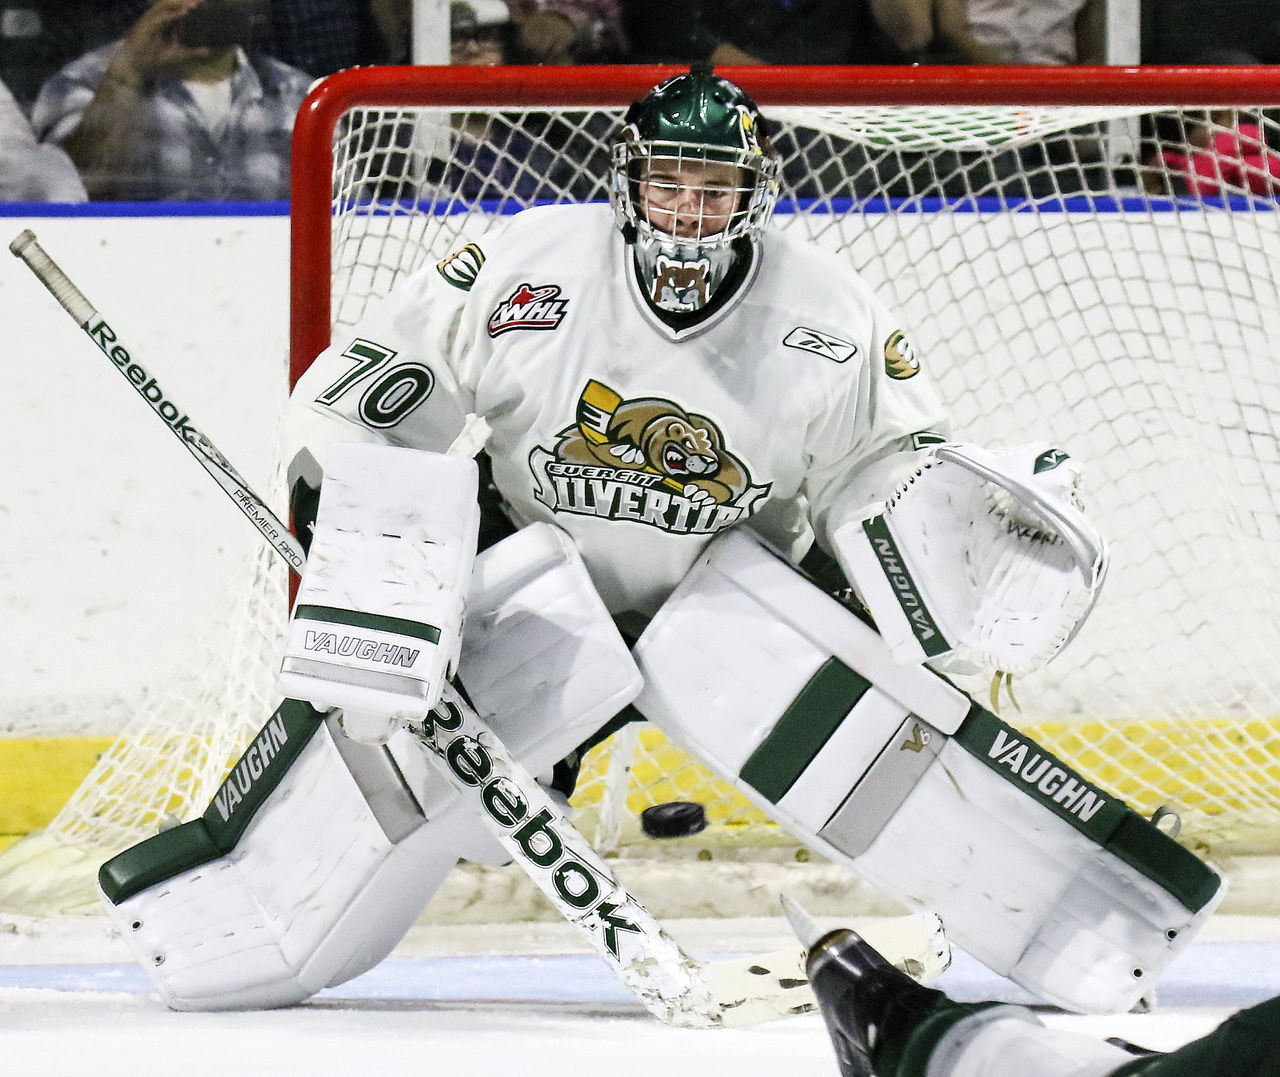 The Silvertips’ Carter Hart won the Del Wilson Memorial Trophy on Wednesday as the league’s top goaltender.